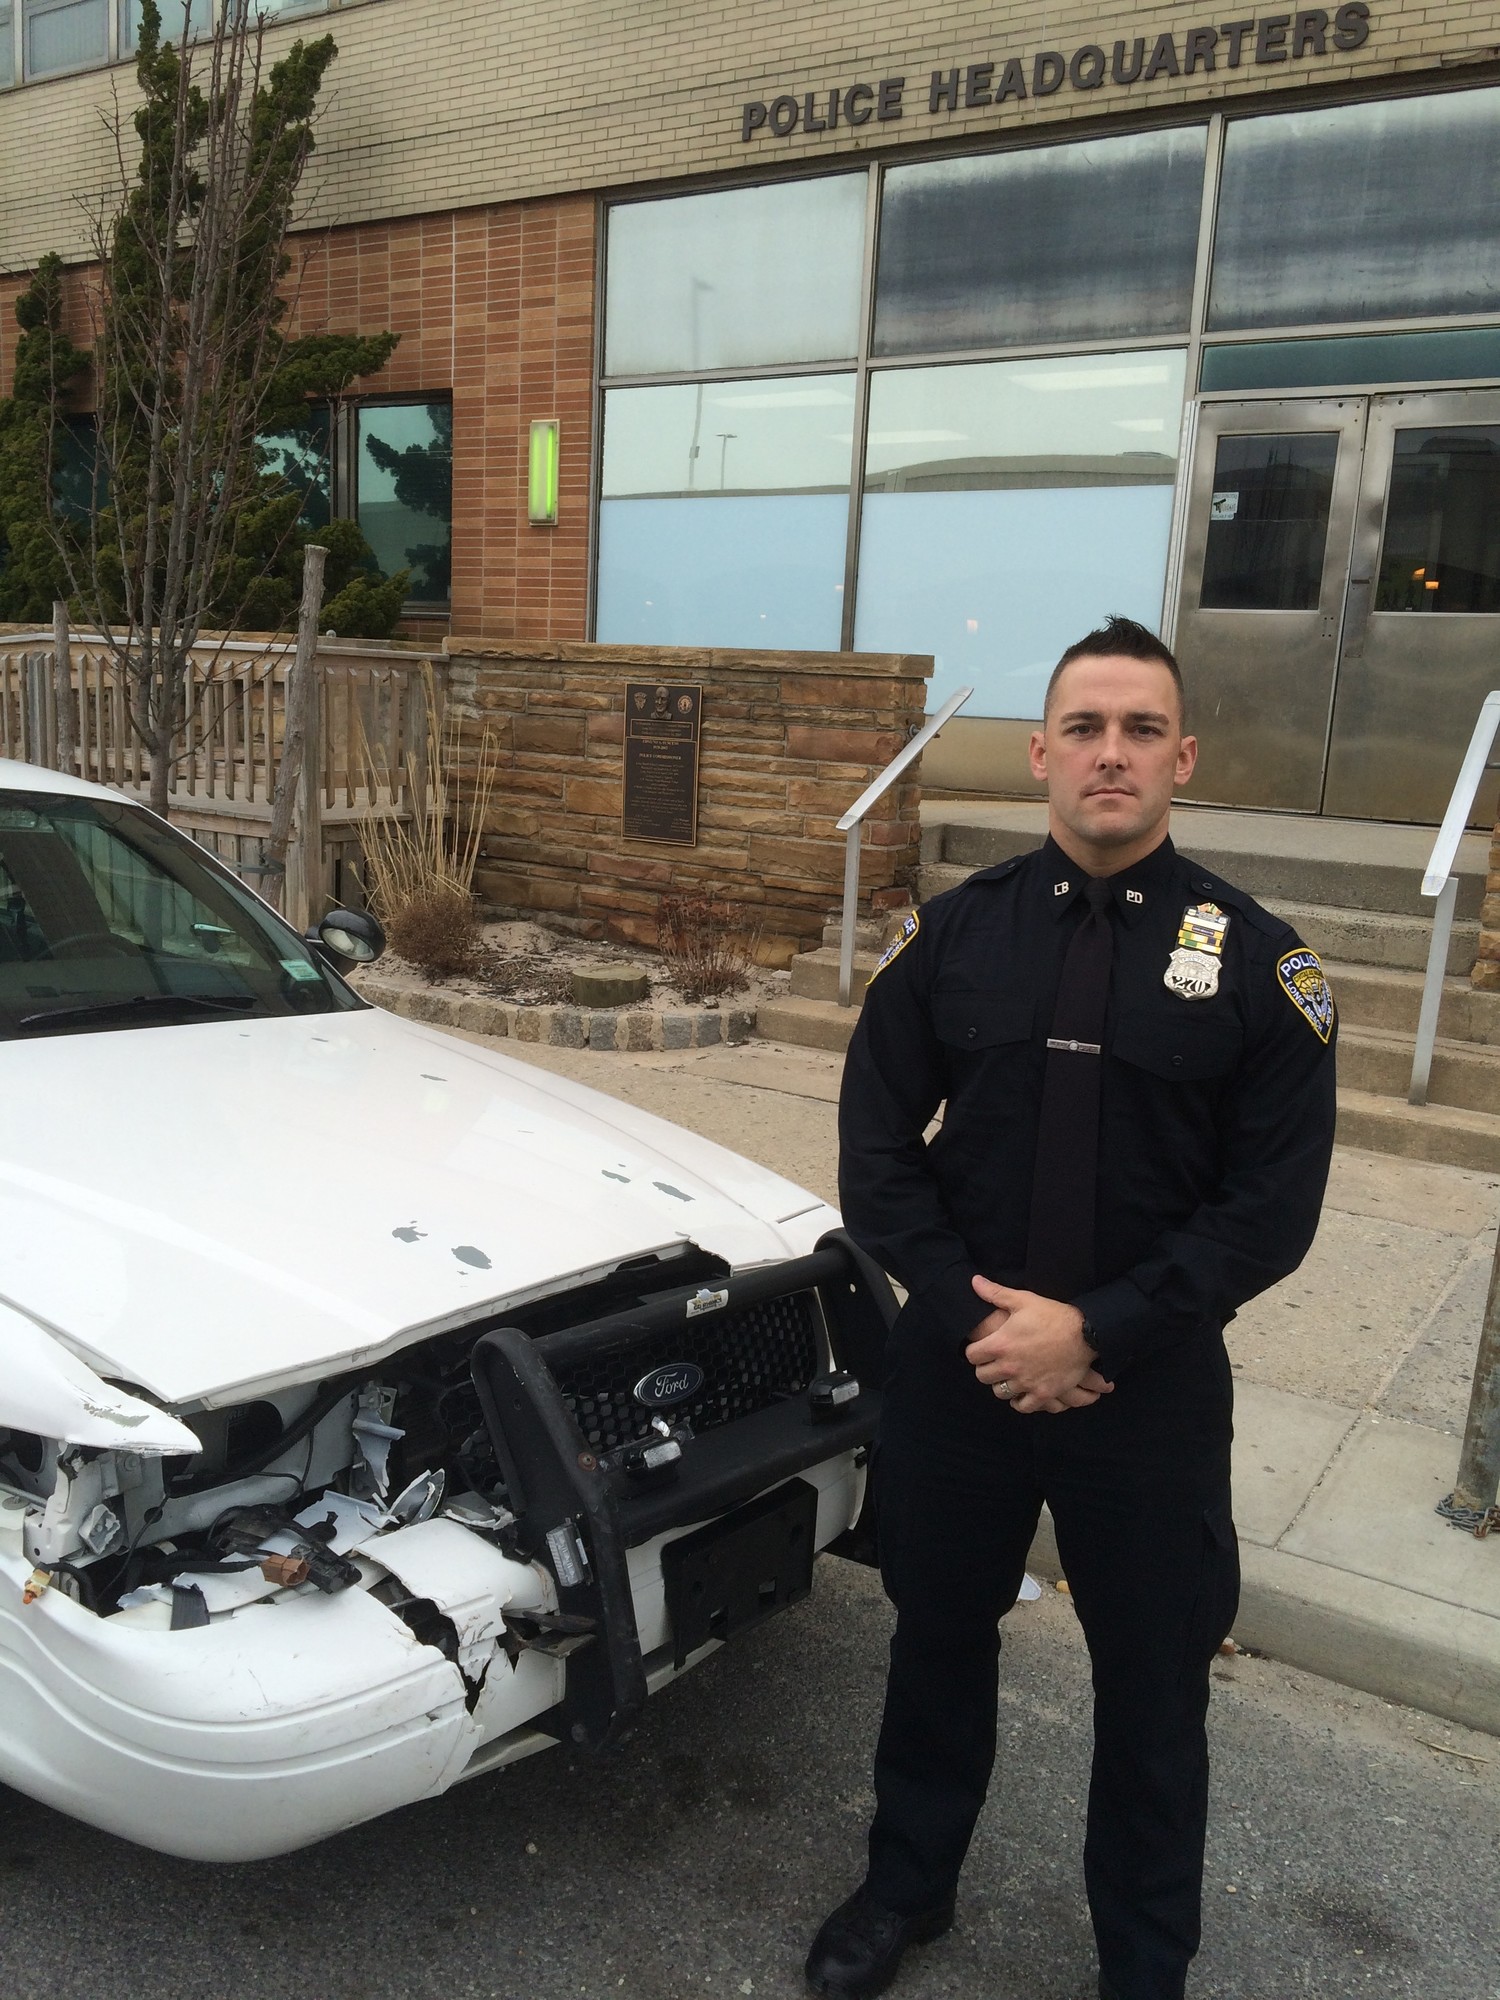 LBPD Officer Brian Eidens next to his damaged police cruiser on Monday.